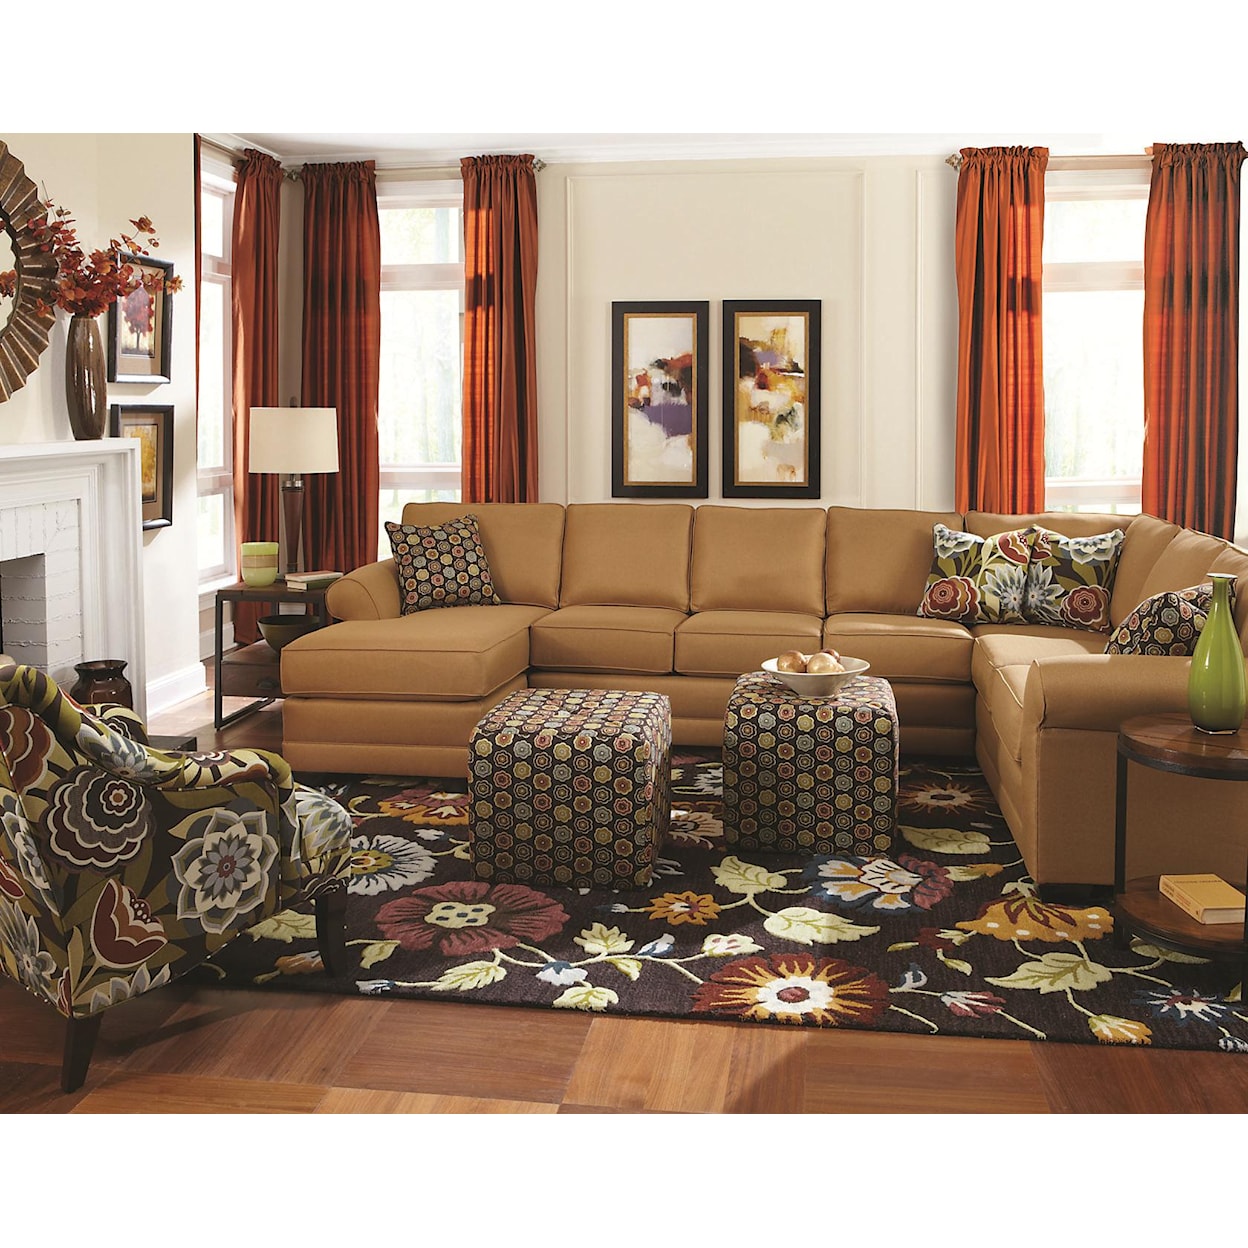 England 5630 Series 6 Seat Sectional with Chaise